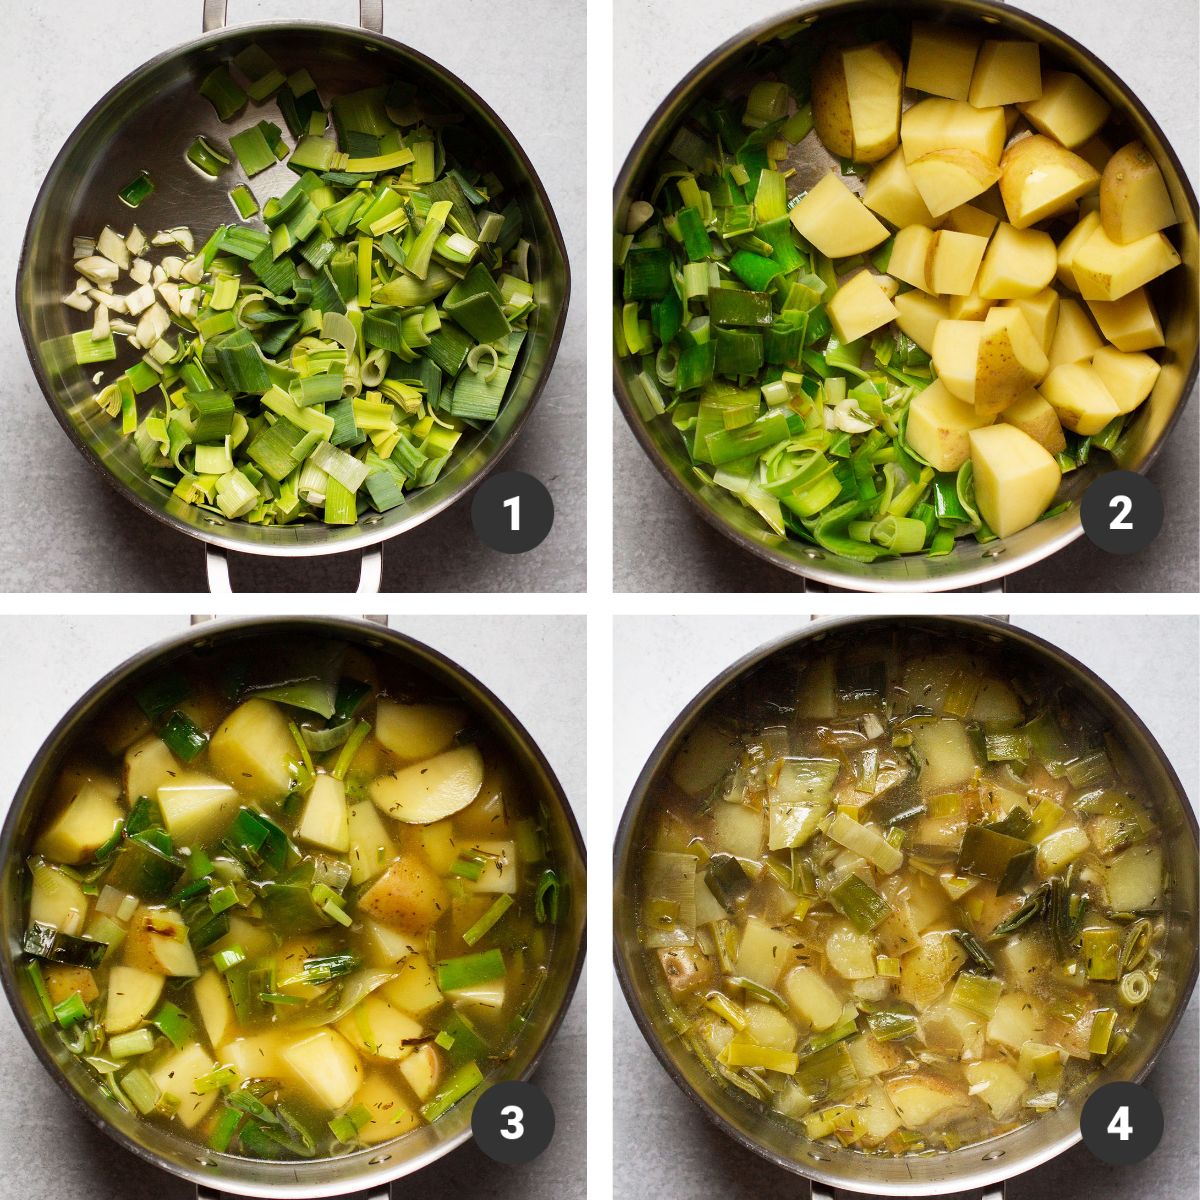 Cooking leeks and potatoes in a large pot with vegetable stock.